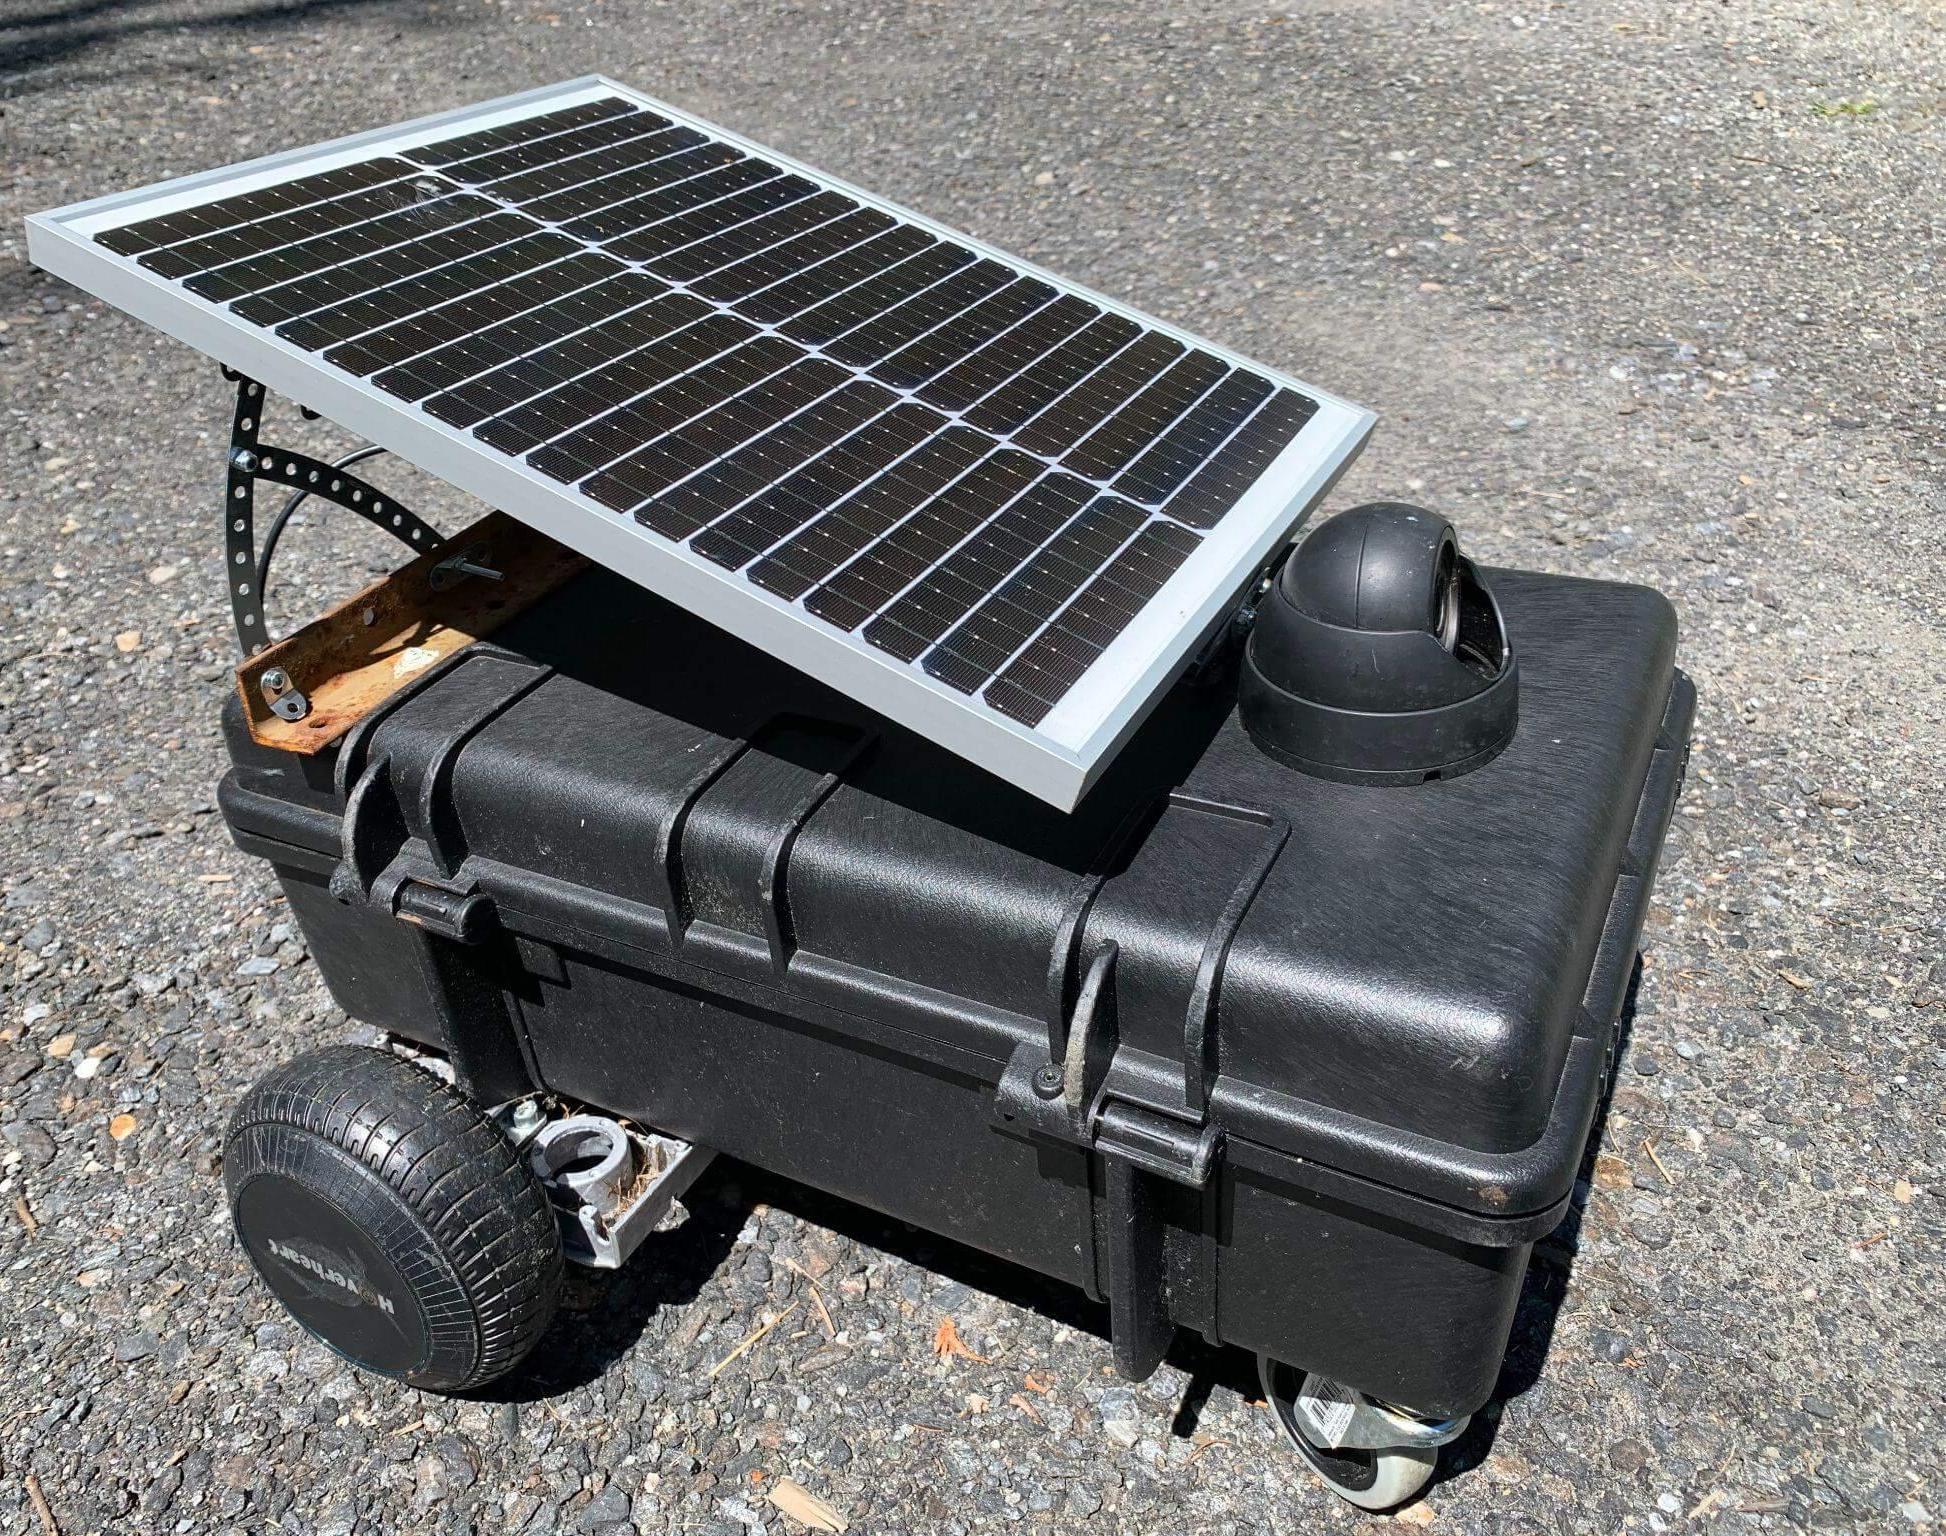 Build an Outdoor Rover With a Raspberry Pi: Simple, Useful and Affordable